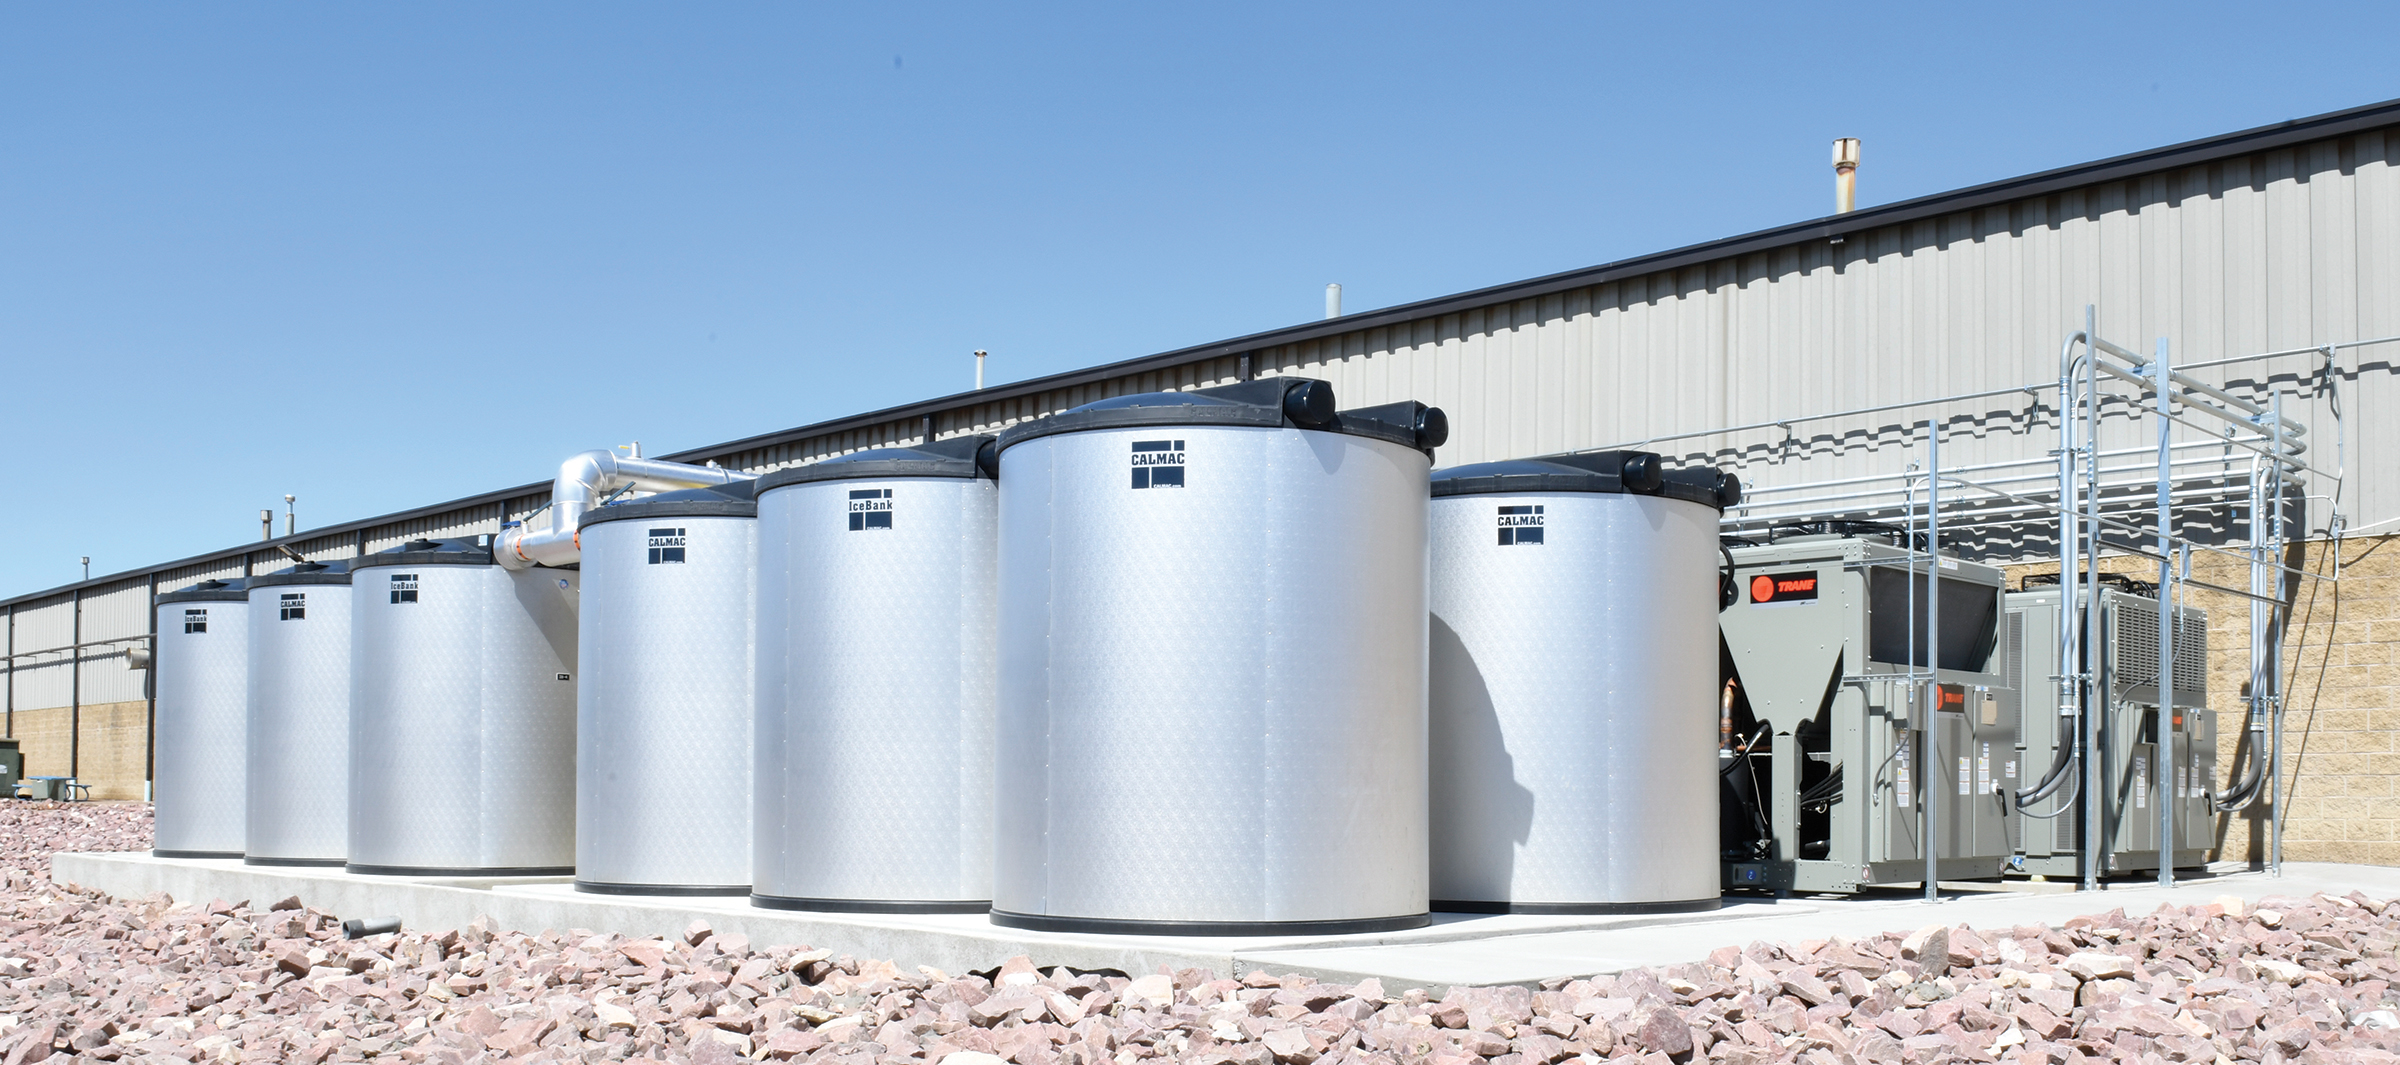 Ice Storage or Chilled Water Storage? Which Is Right for the Job?